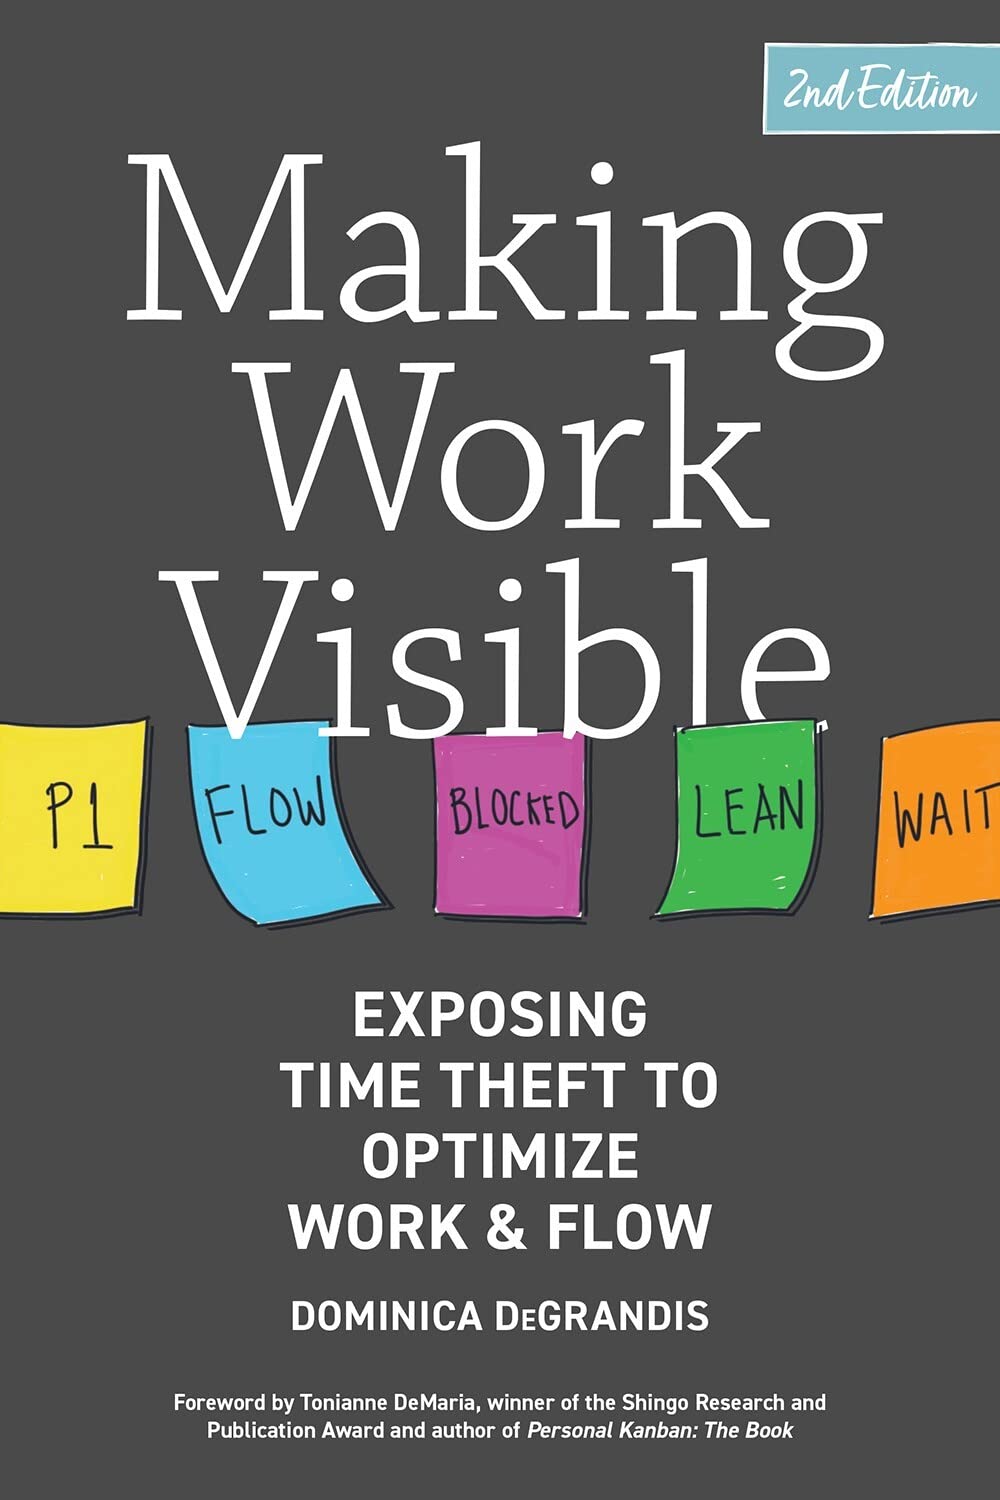 Dominica DeGrandis: Making Work Visible, Second Edition (2022, IT Revolution Press)